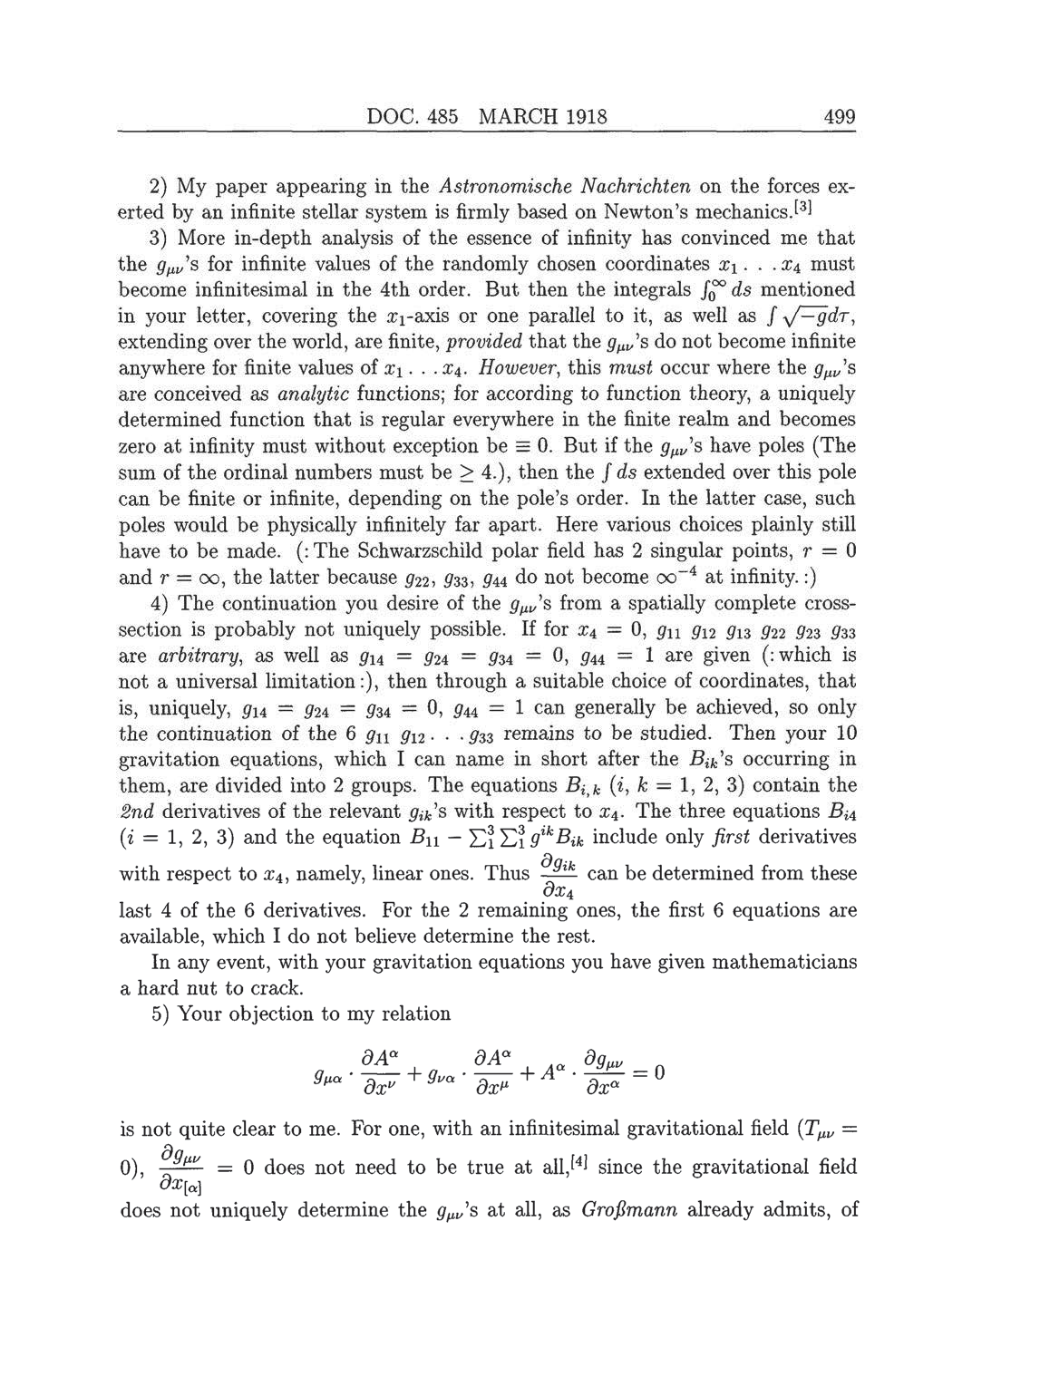 Volume 8: The Berlin Years: Correspondence, 1914-1918 (English translation supplement) page 499